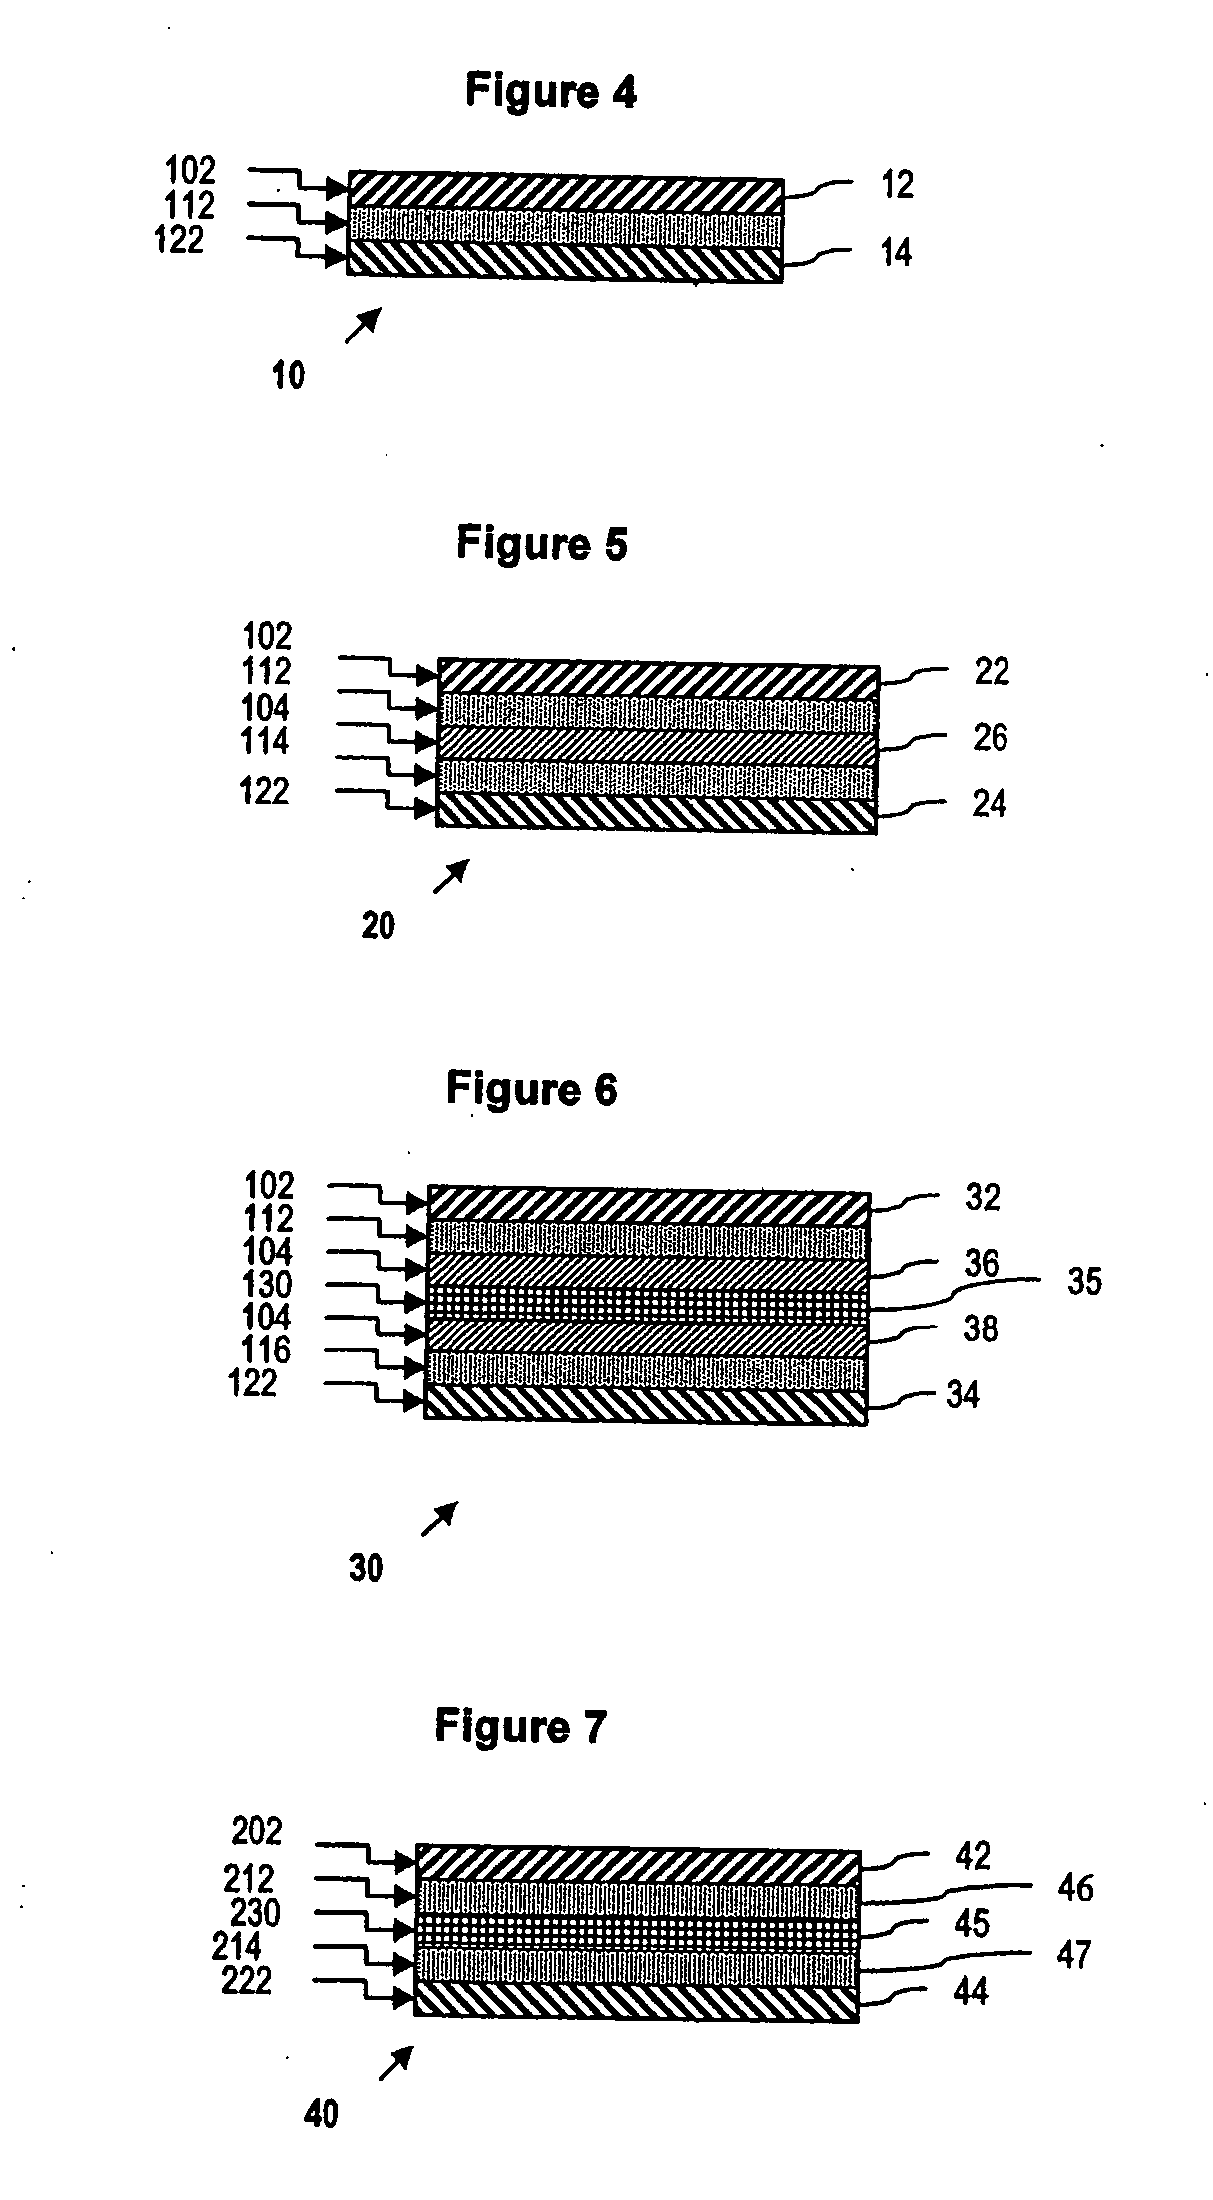 Method for distributing a myoglobin-containing food product